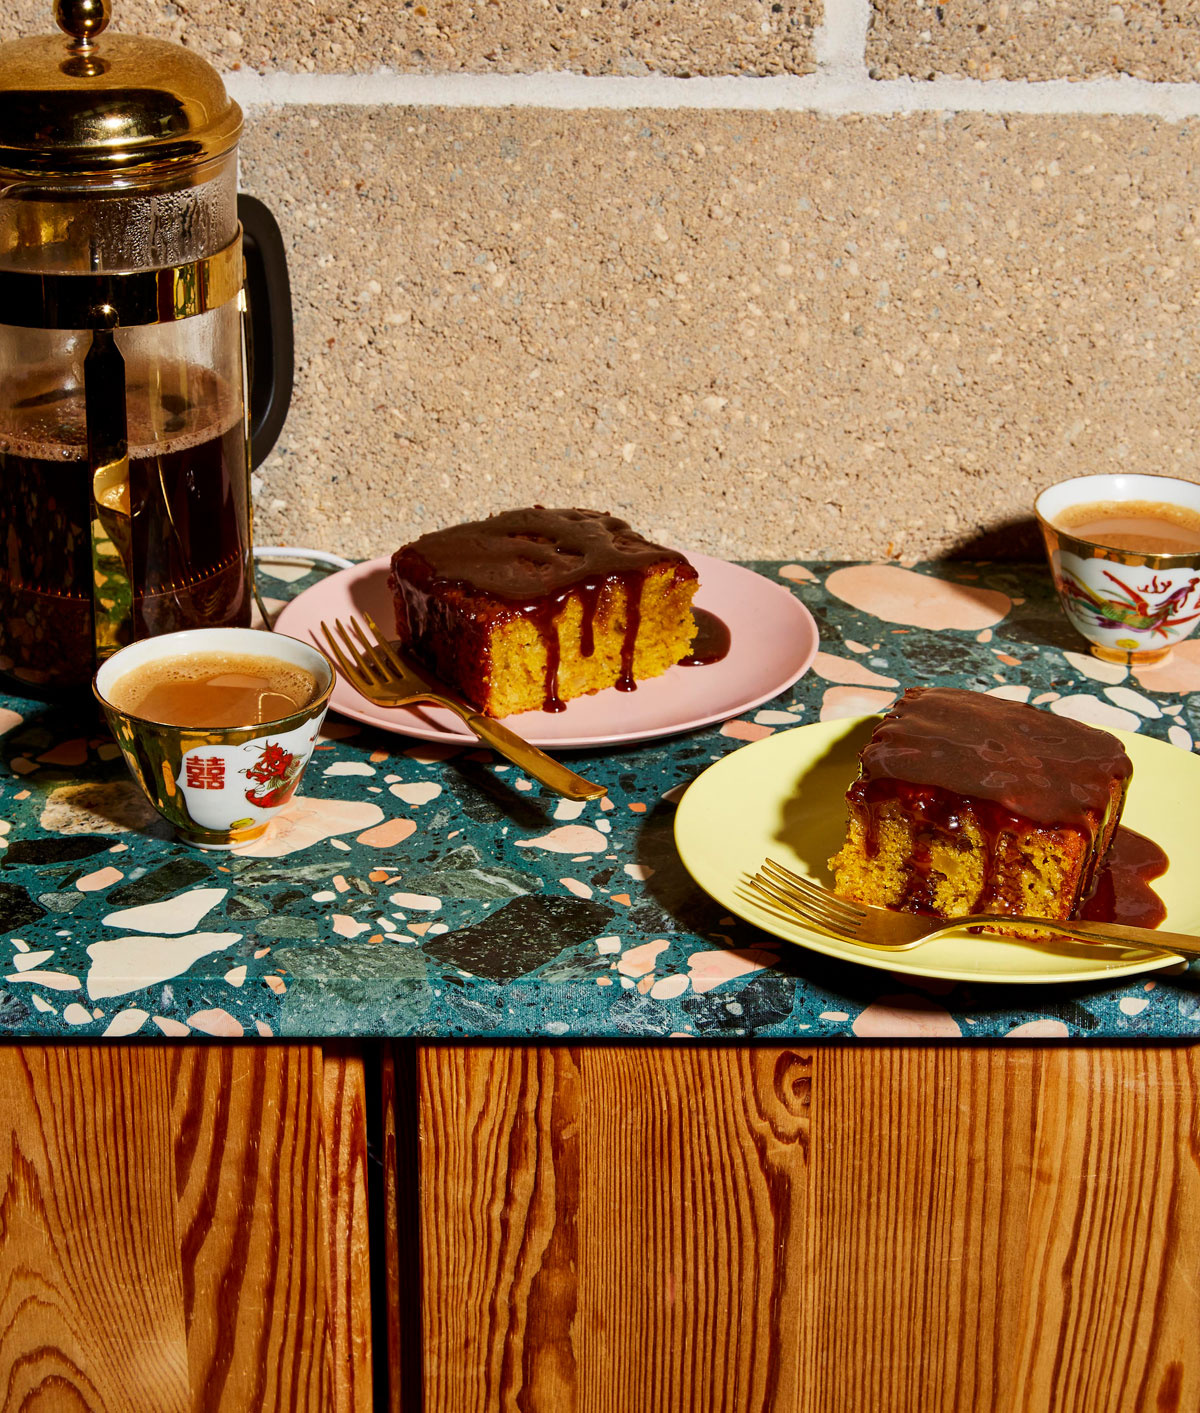 Image of Lara Lee's Sticky Banana Toffee Pudding with Soy Caramel